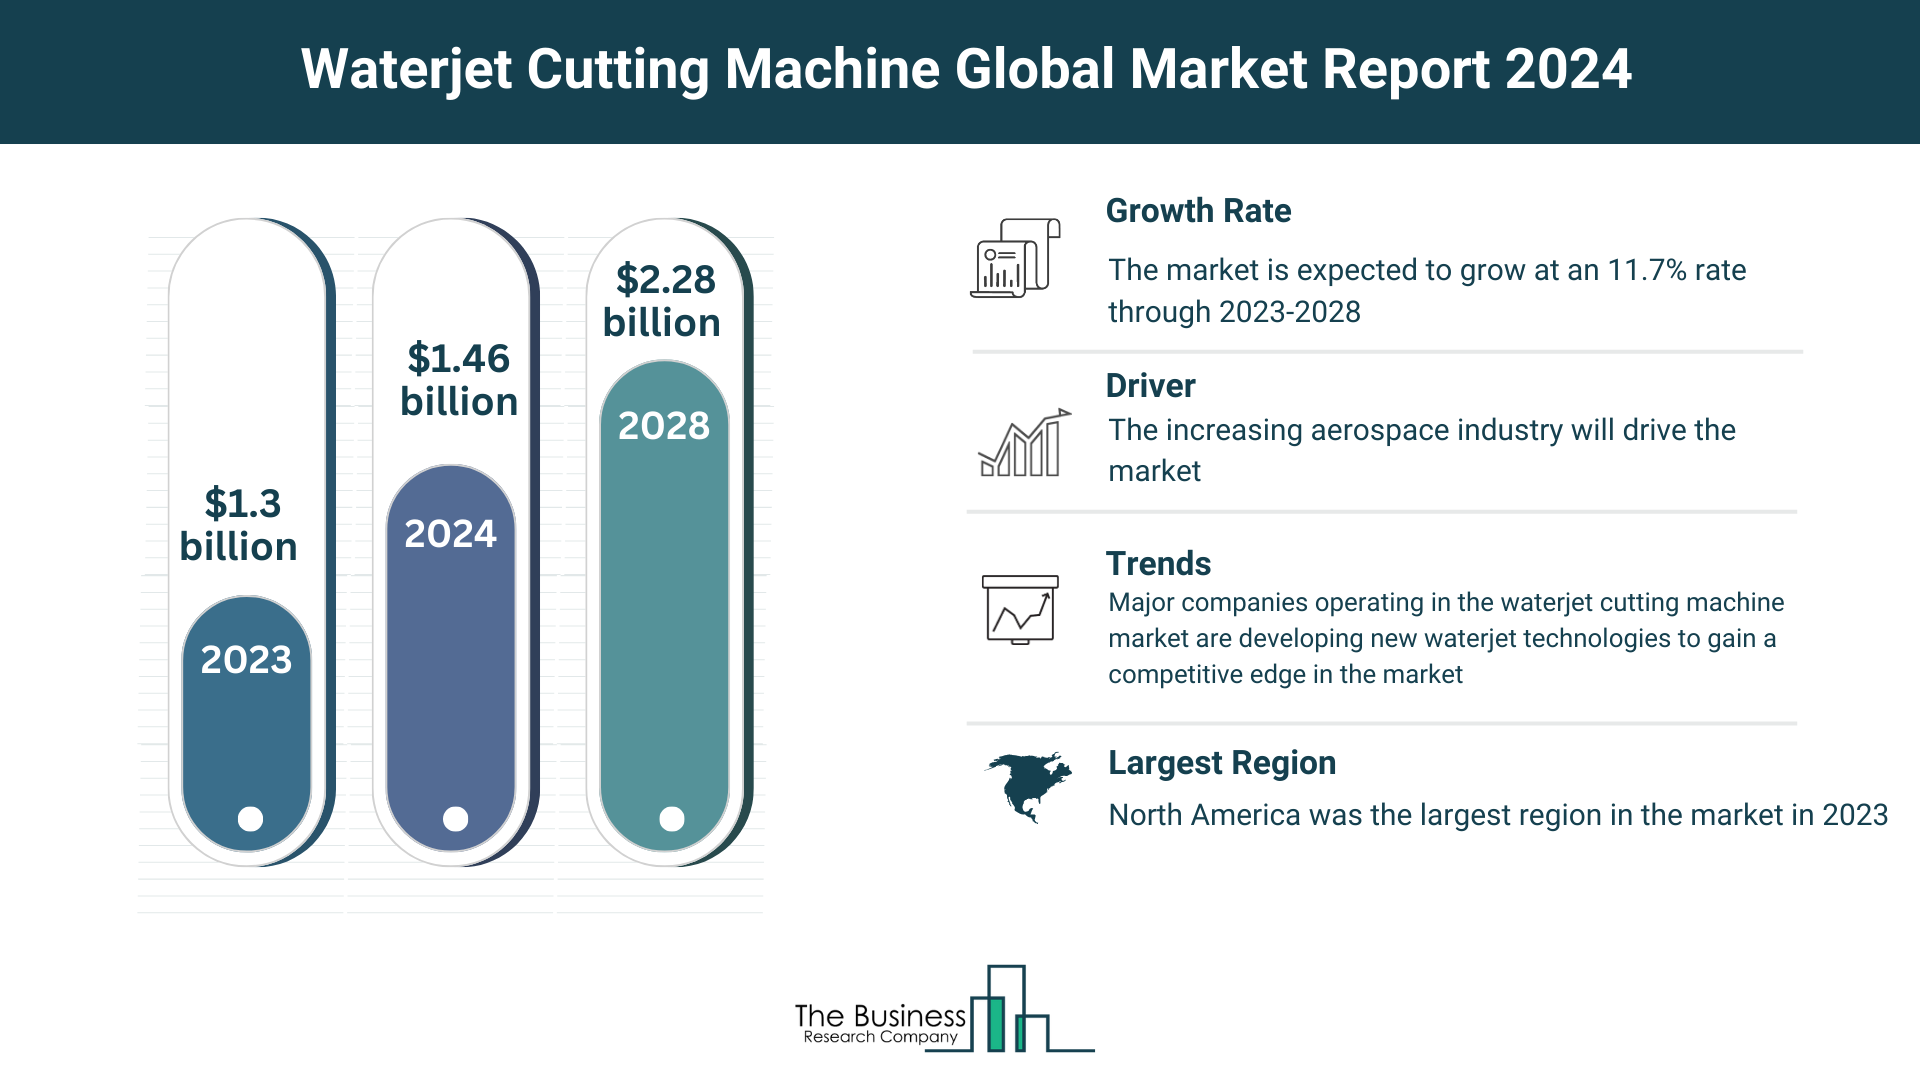 Waterjet Cutting Machine Market Overview: Market Size, Major Drivers And Trends